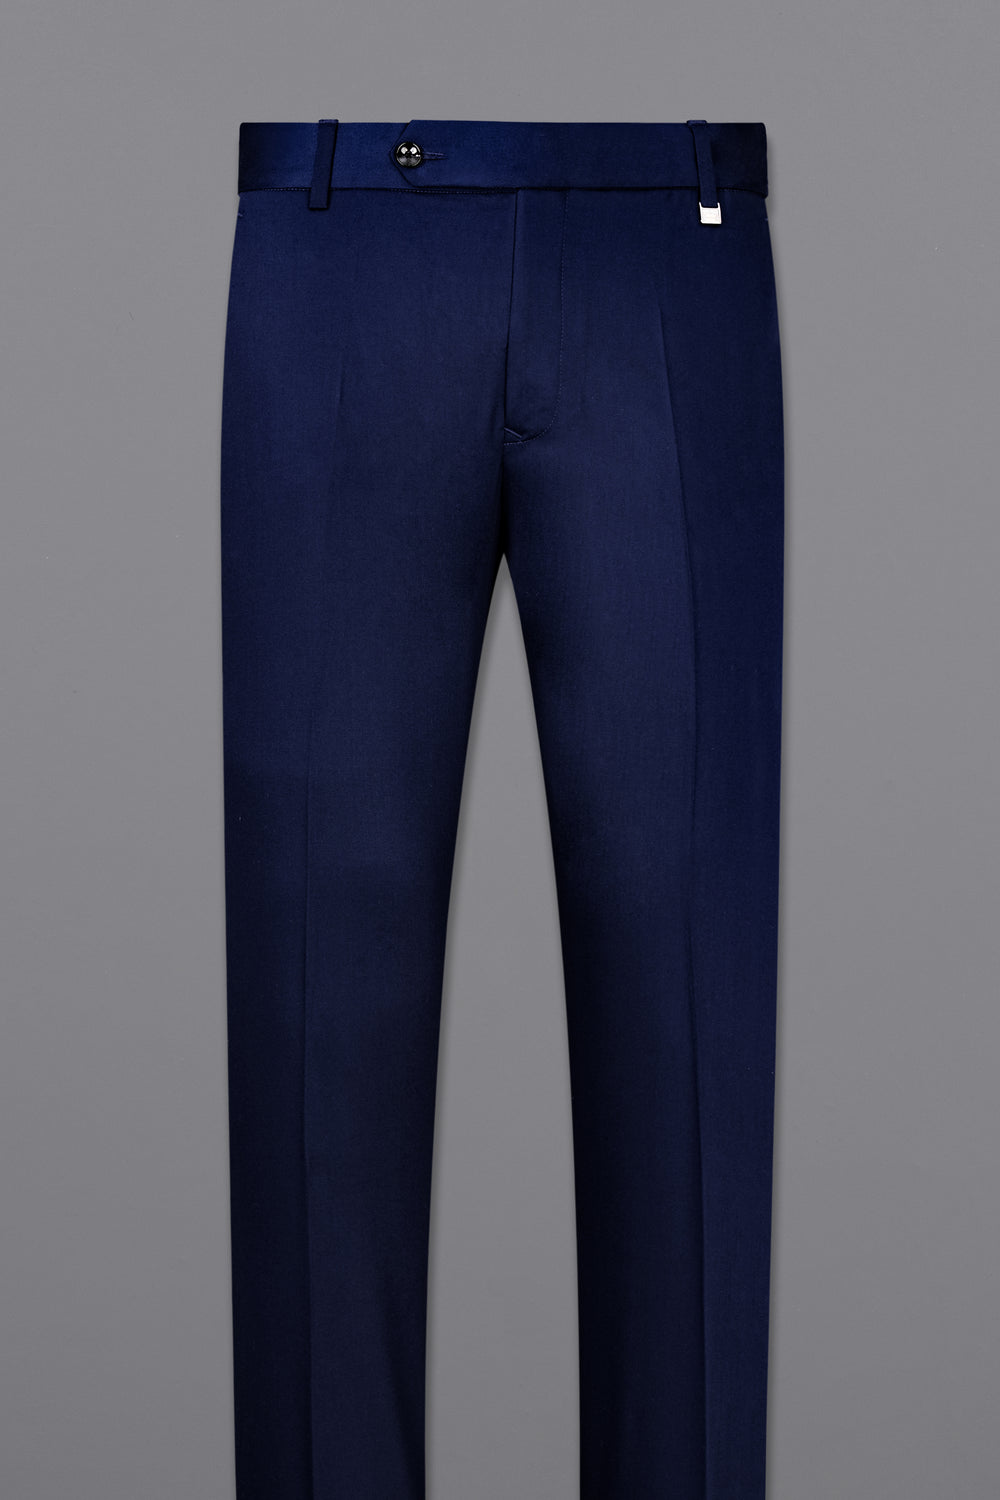 corporate trouser blue |trouser | royal blue trousers | trousers supplier  india